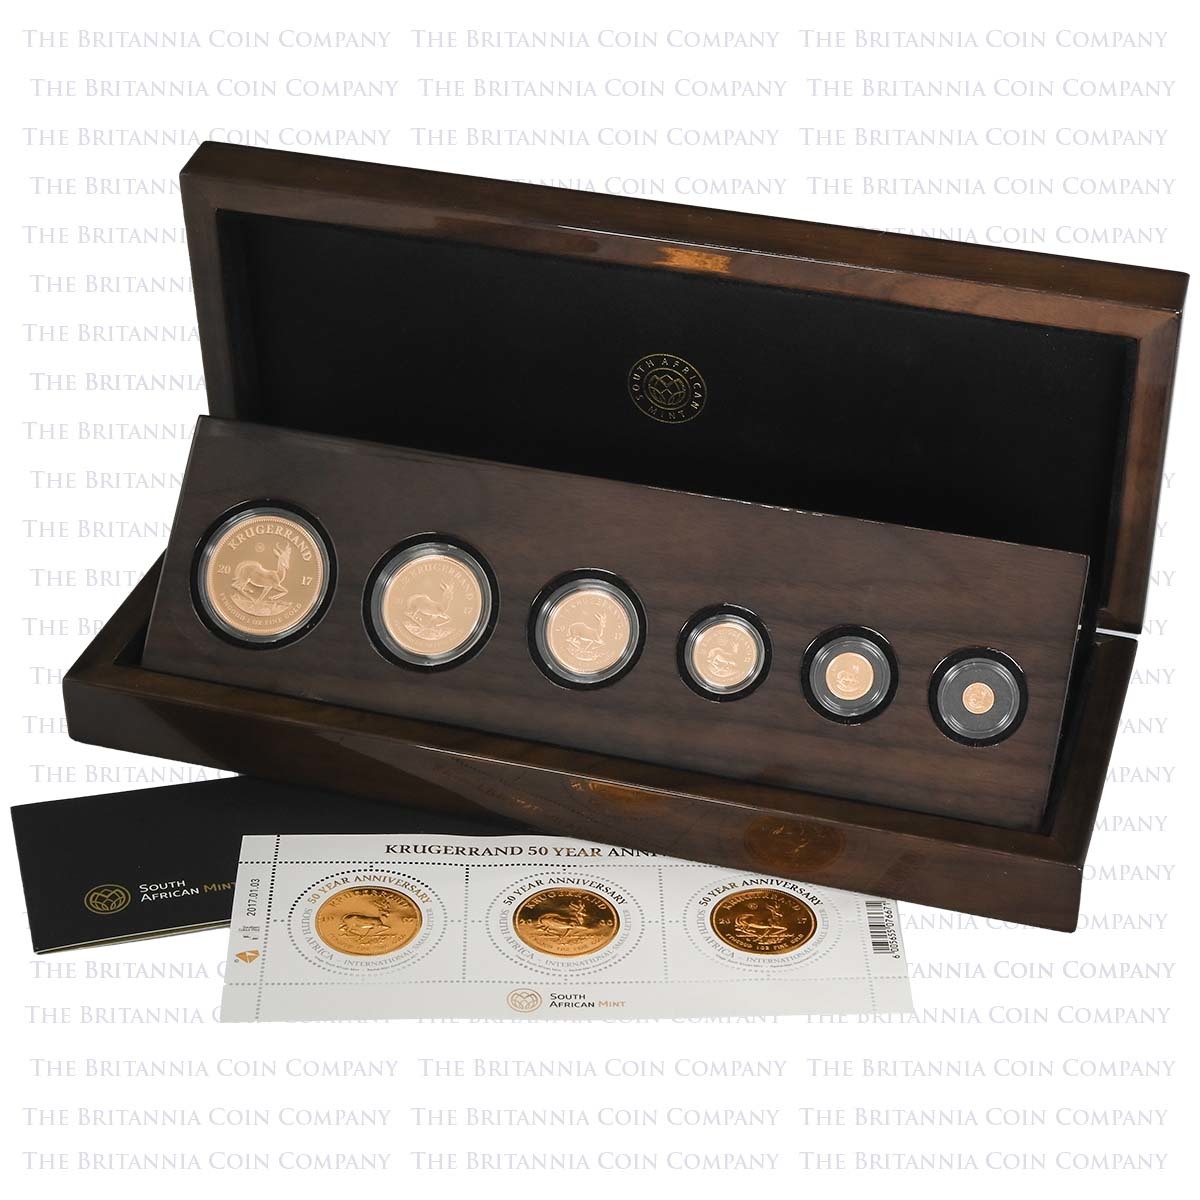 2017 Gold Proof 6 Krugerrand Set 50th Anniversary Boxed